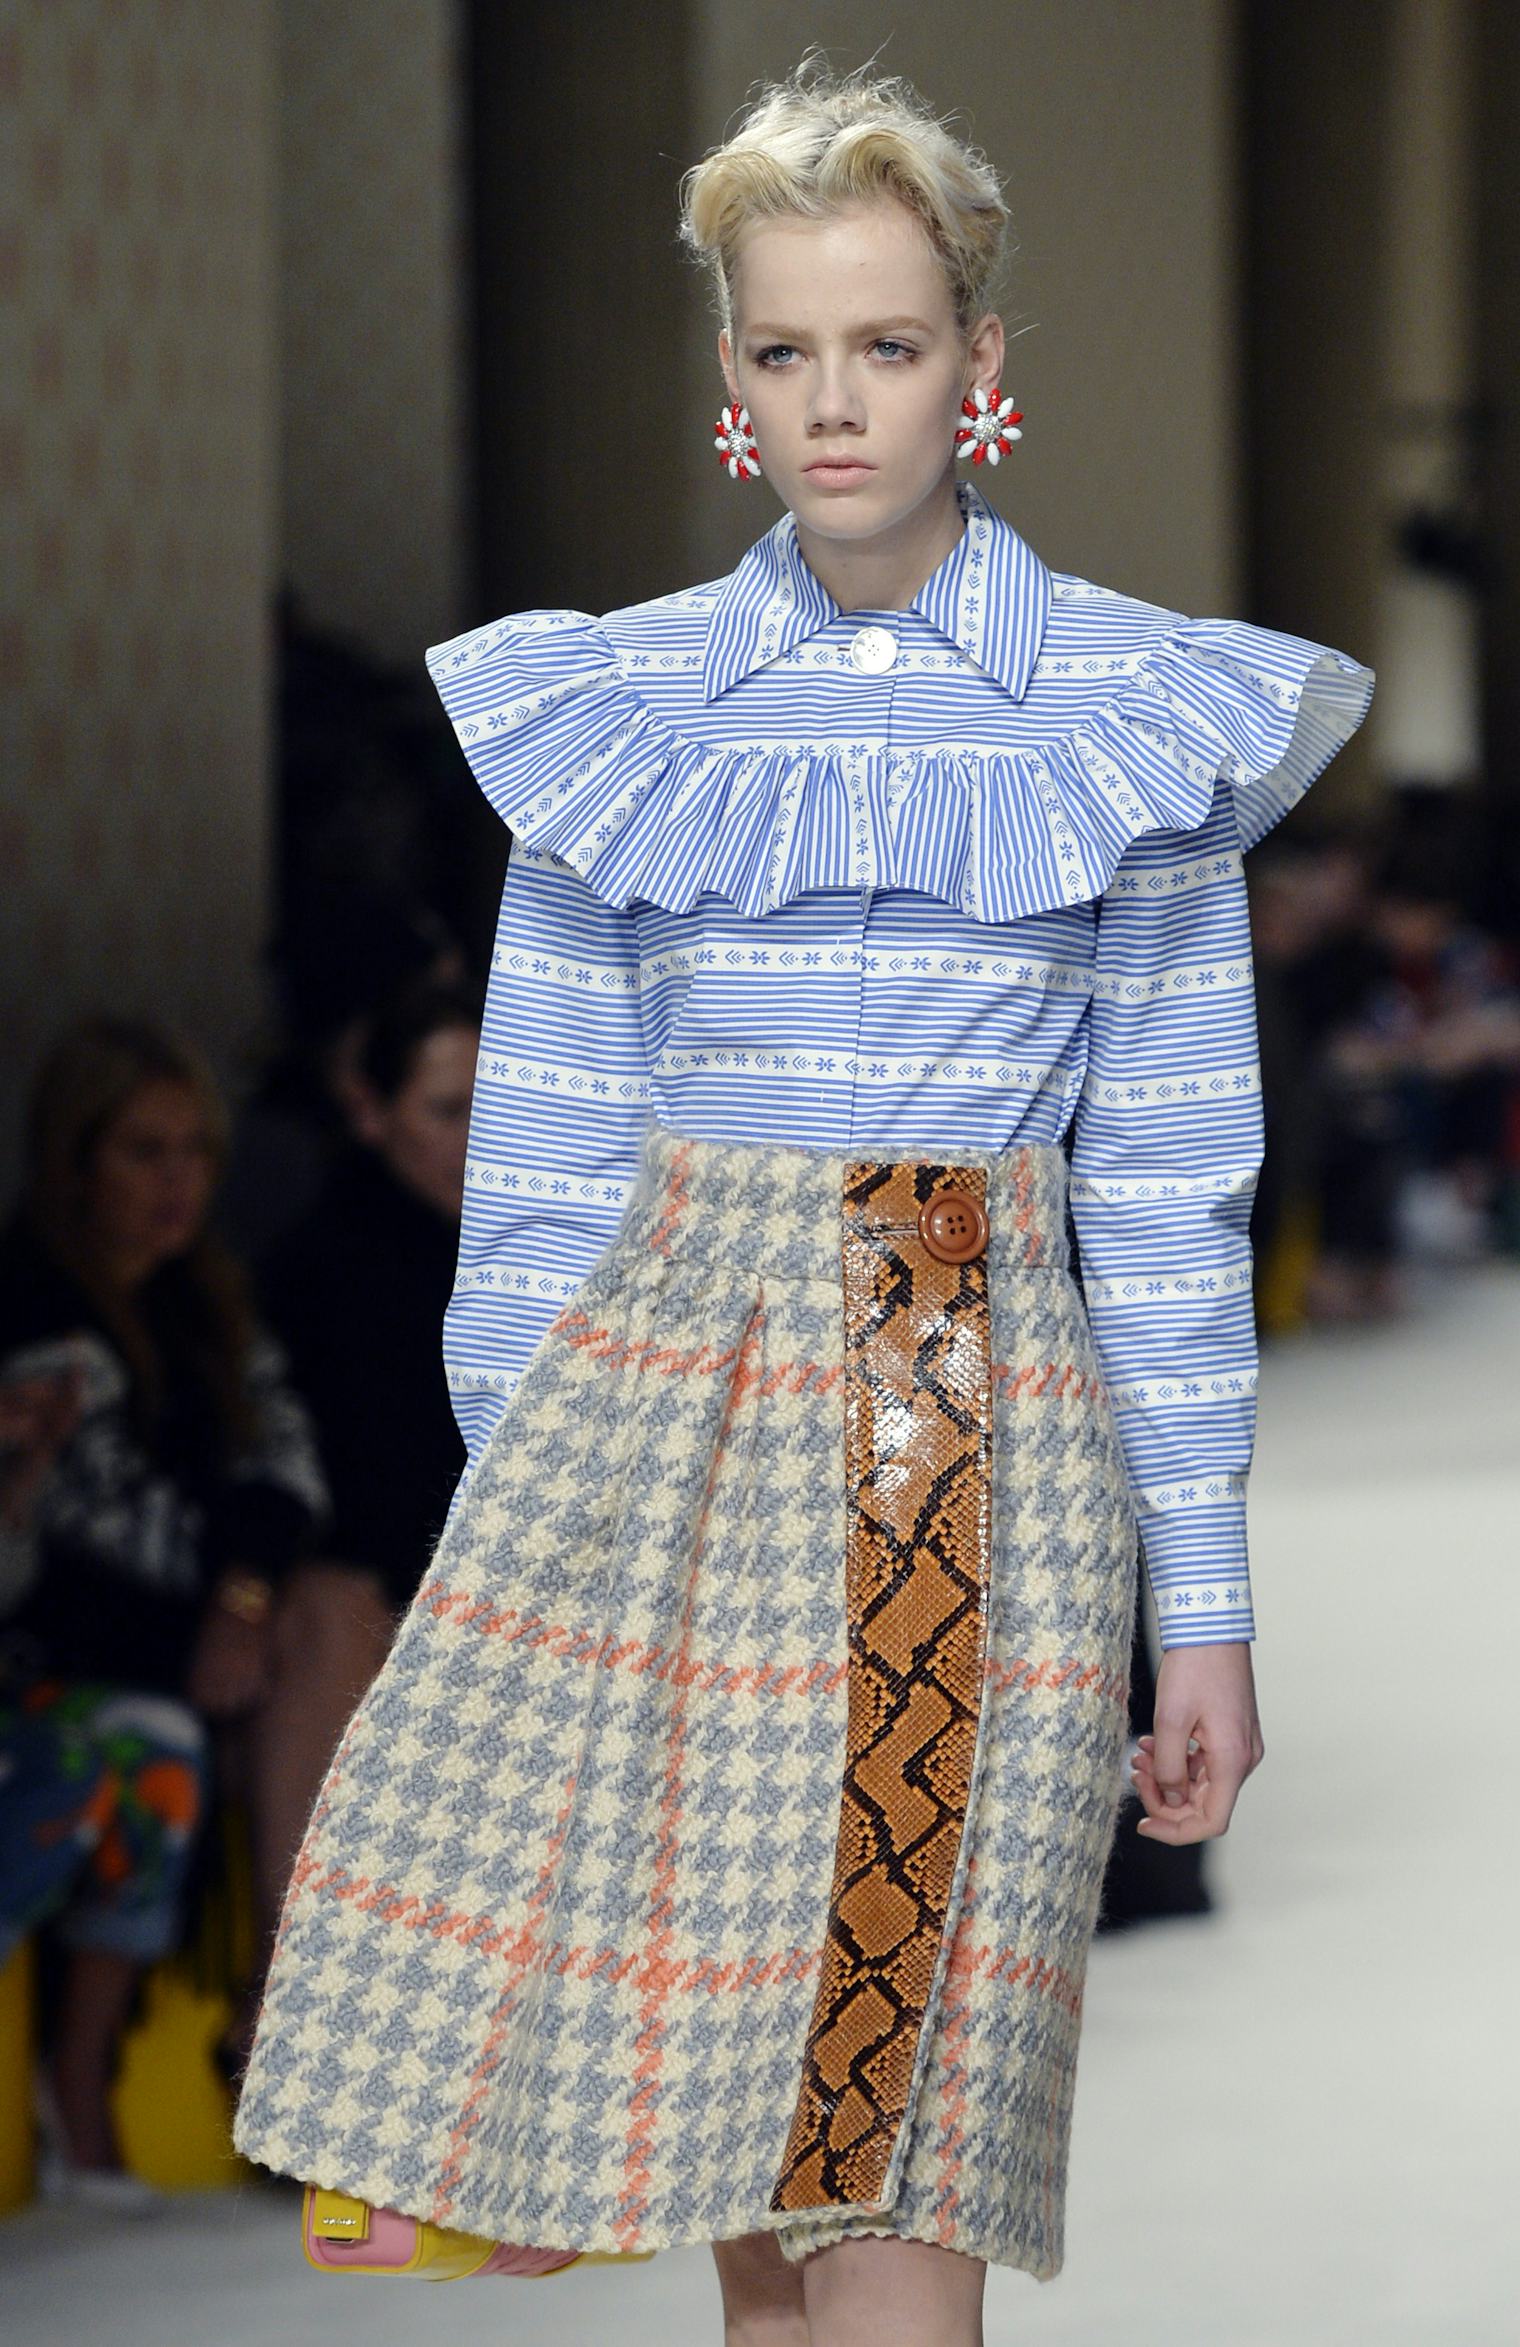 Miu Miu's F/W 2015 Collection Encourages Customers To Get Their Vintage On